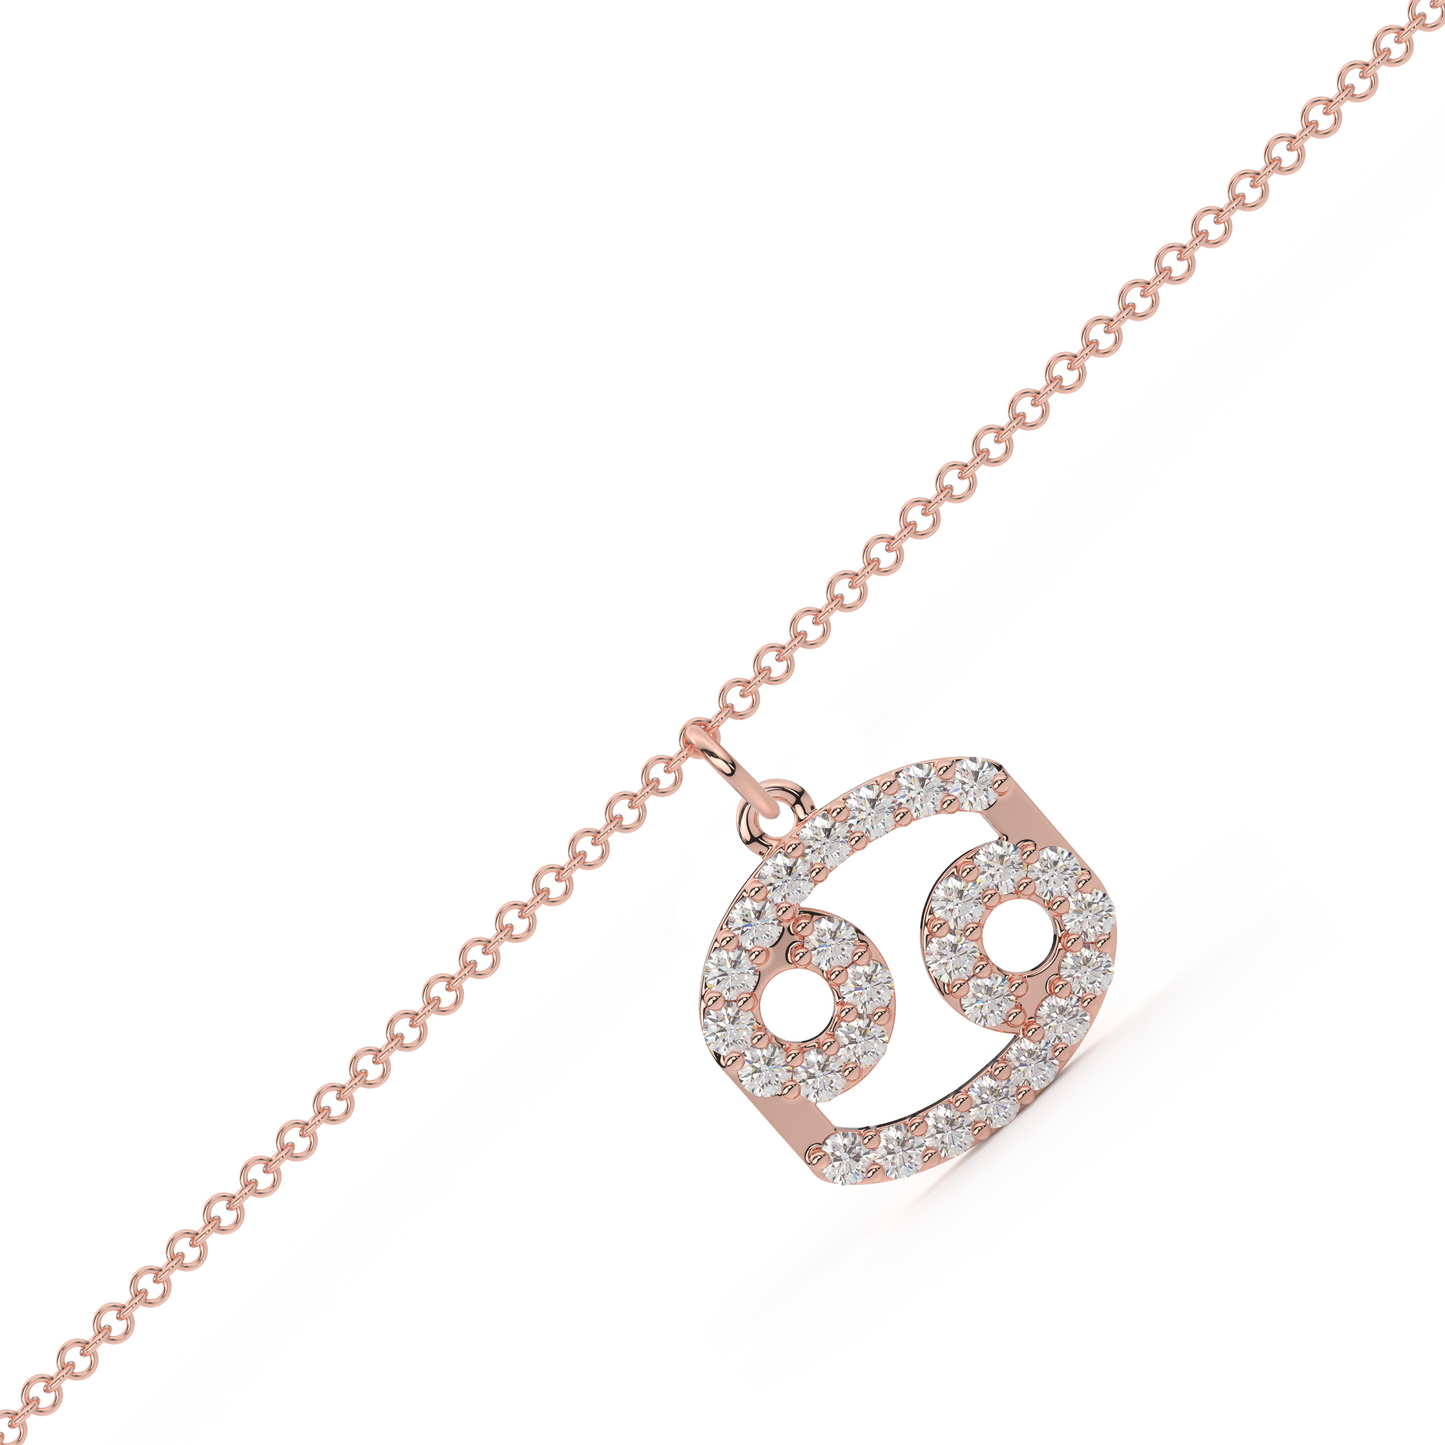 Channel the nurturing energy of Cancer with our exquisite Zodiac bracelet, crafted to reflect your emotional depth and intuition.Pair this sentimental accessory with soft, flowing fabrics and delicate jewelry for a look that embodies your Cancerian sensitivity and grace.